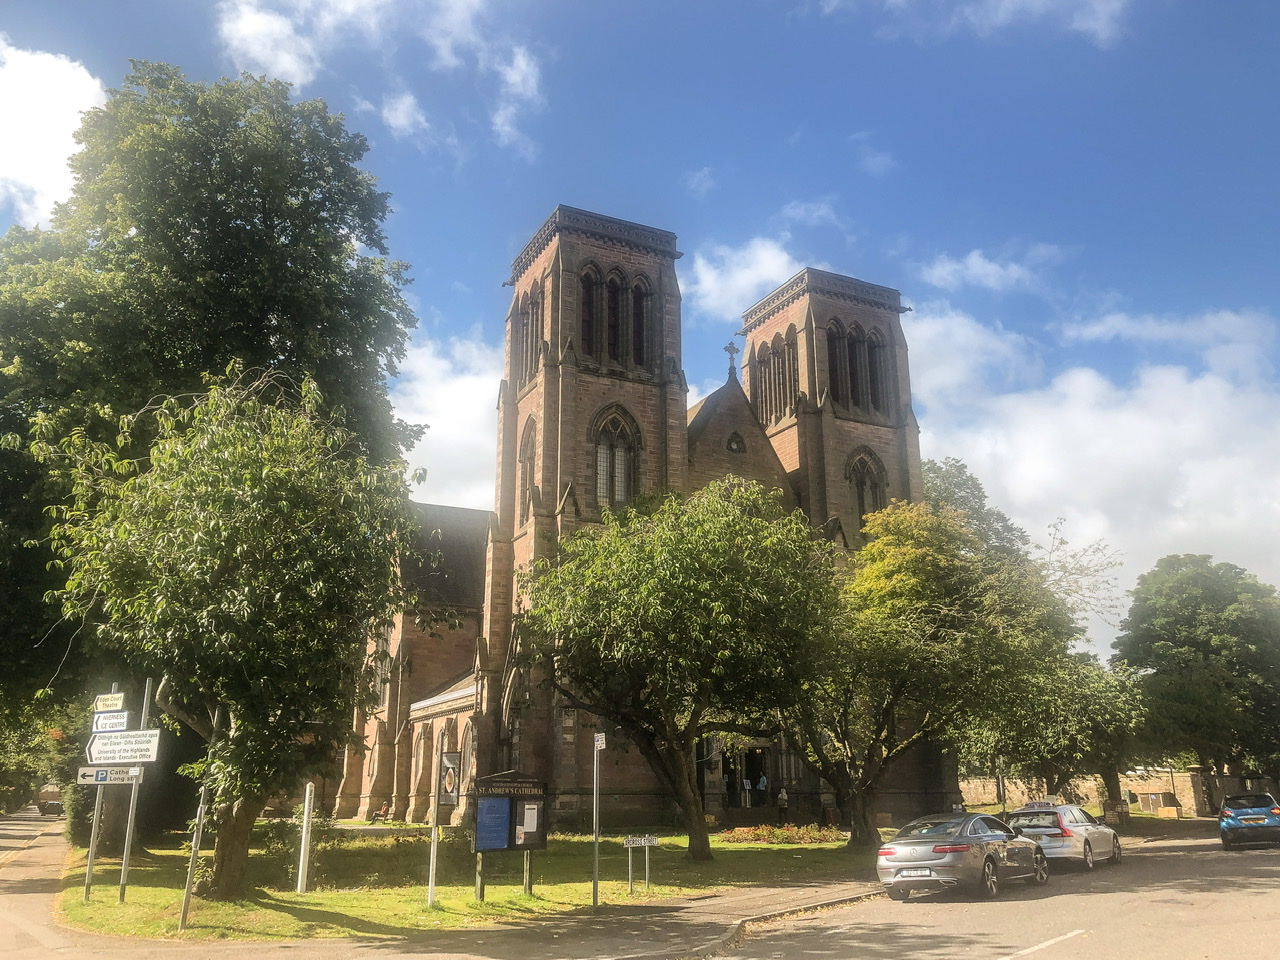 Exterior shot of brown sandstone cathedral with no spires on a grassy block with leafy green trees to the right and front